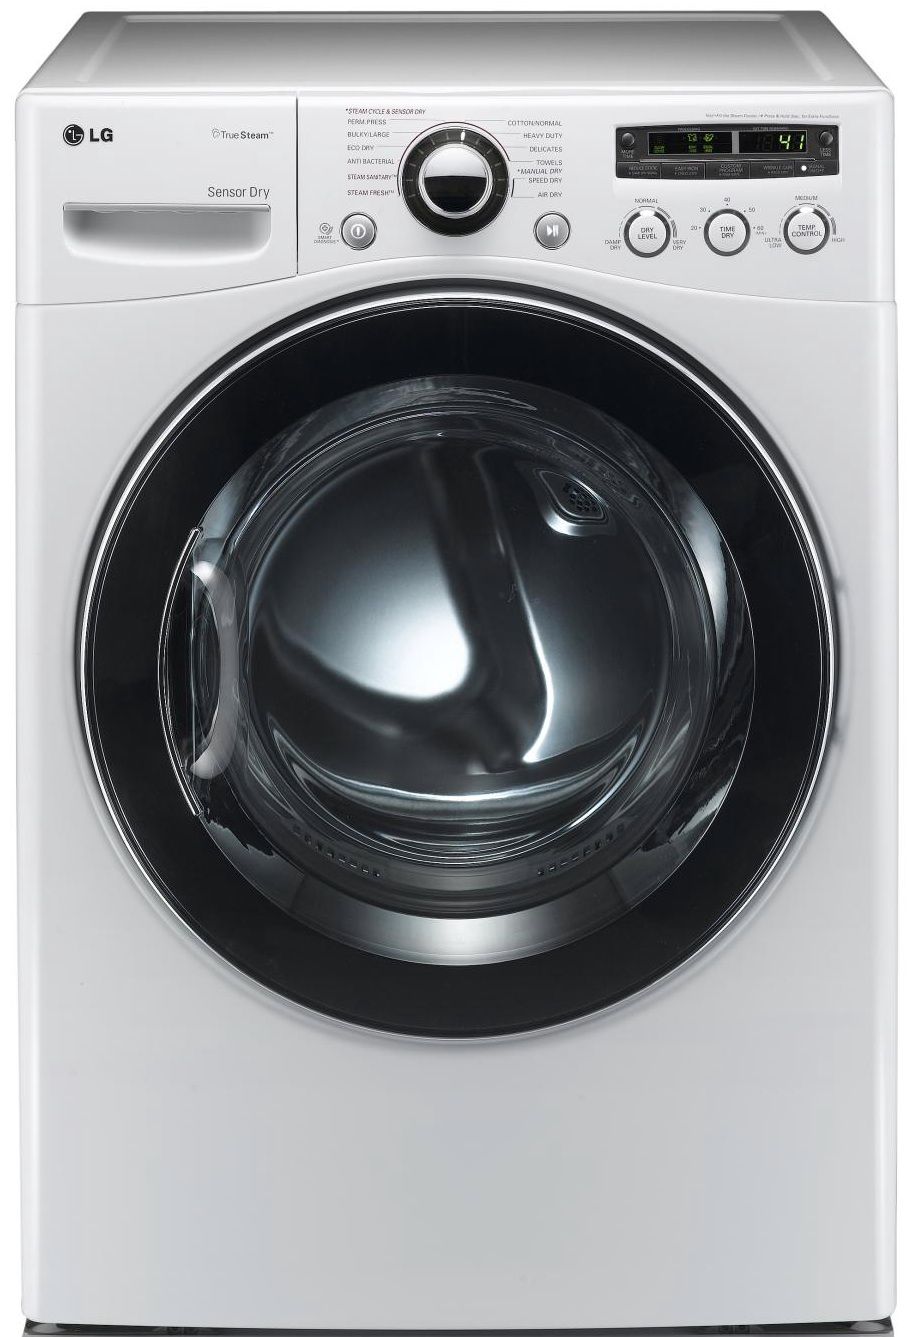 LG 7.4 cu. ft. Ultra-Capacity Electric SteamDryer - White